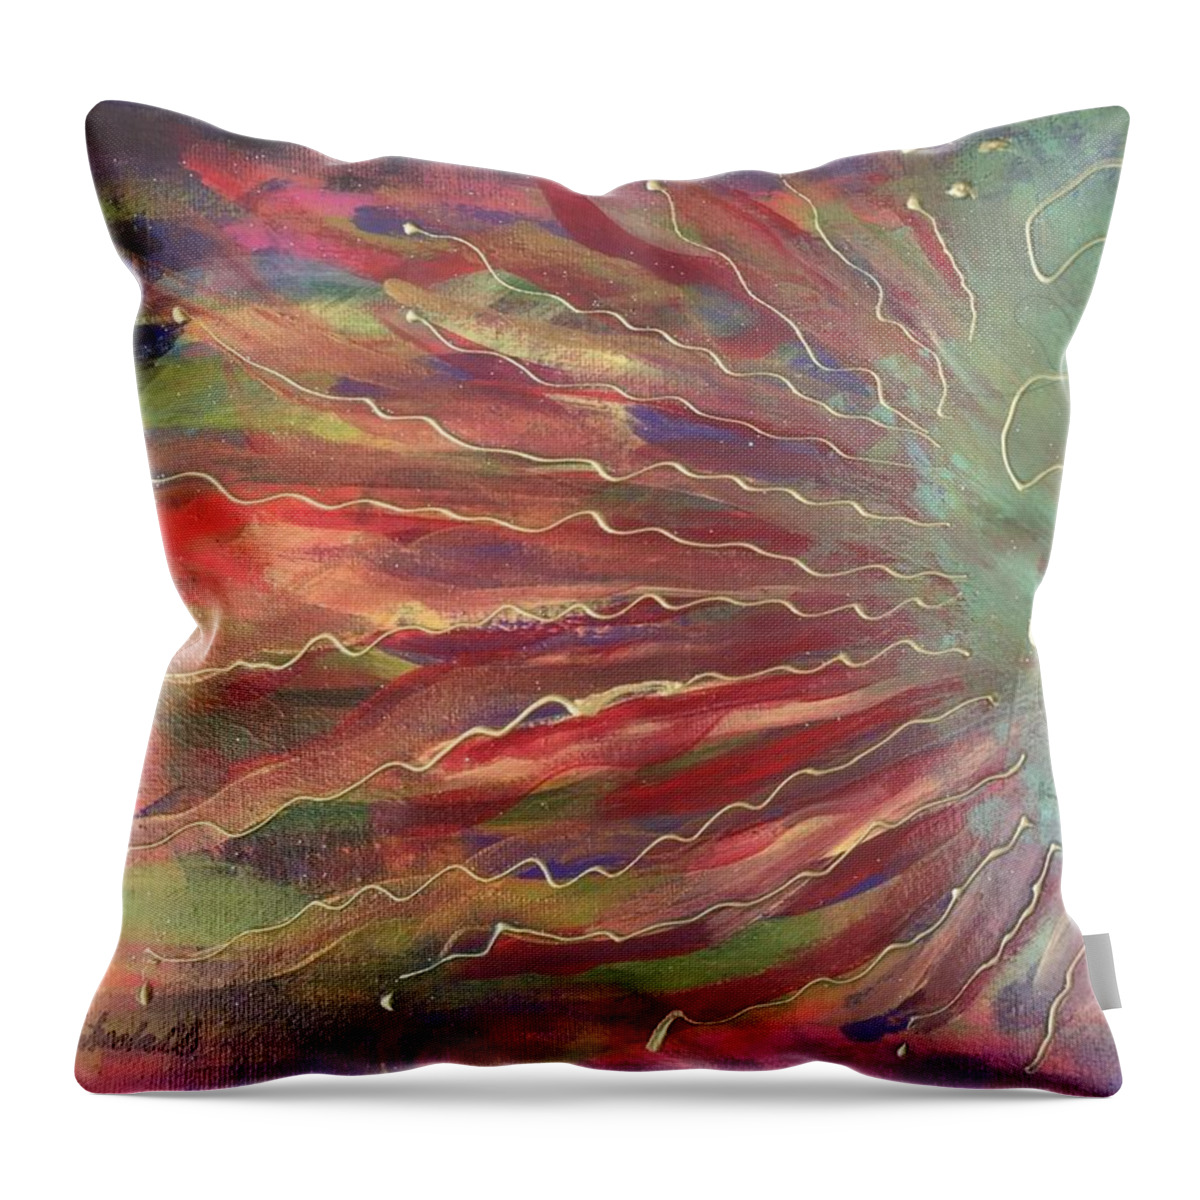  Throw Pillow featuring the painting Cosmic Eruption by Mihaela CD